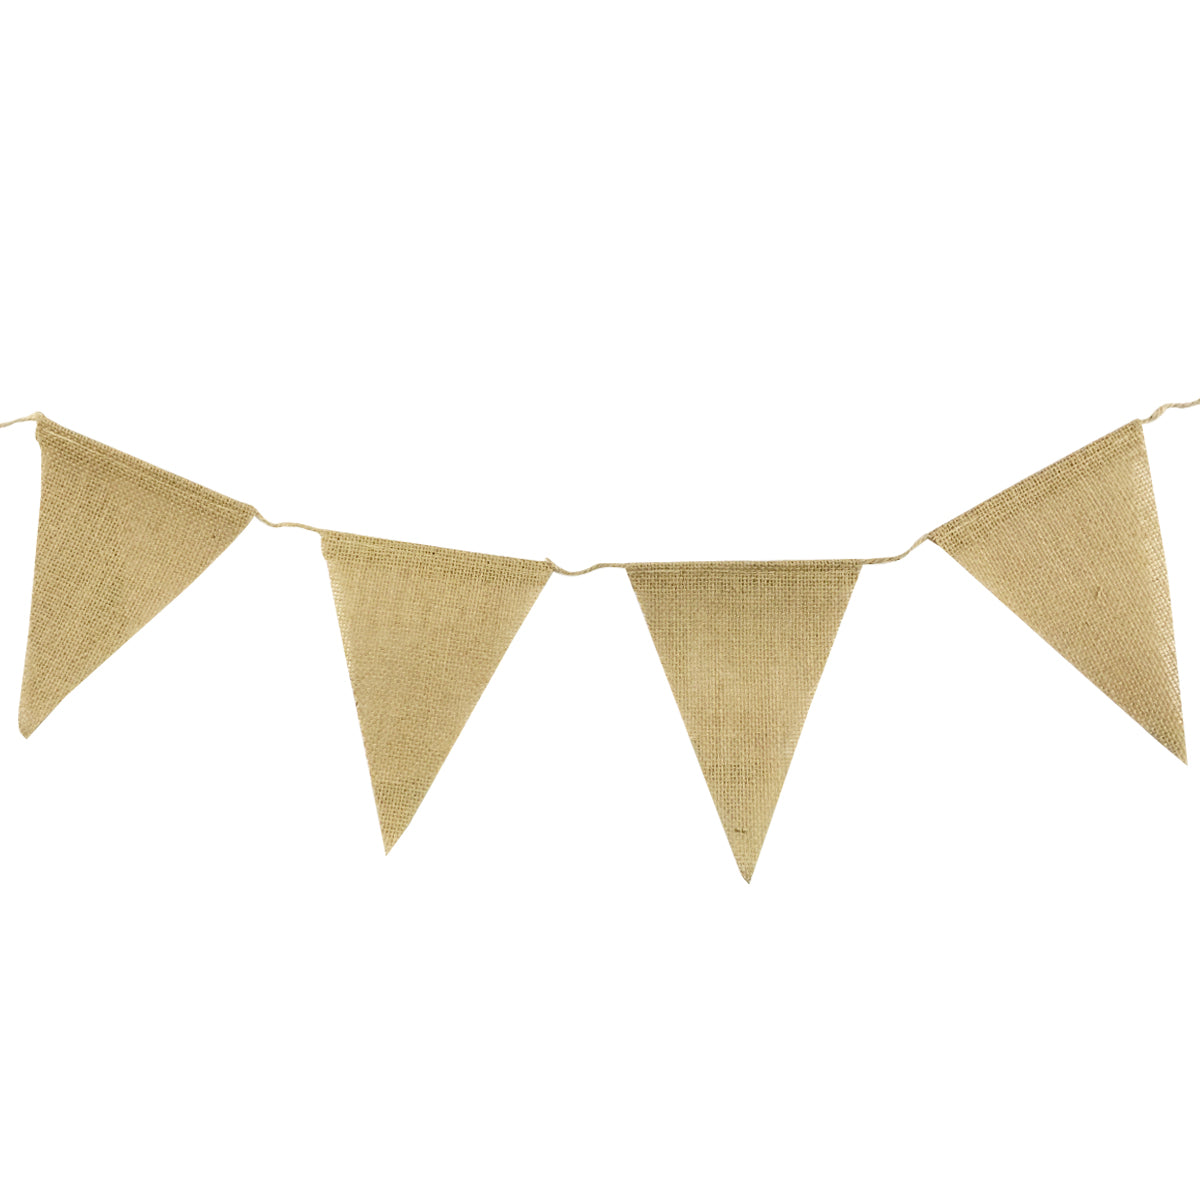 Wrapables Burlap Triangle Pennant Banner Party Decorations Party Decorations for Weddings, Birthday Parties, Baby Showers, Home Decor, Picnics, and Bake Sales